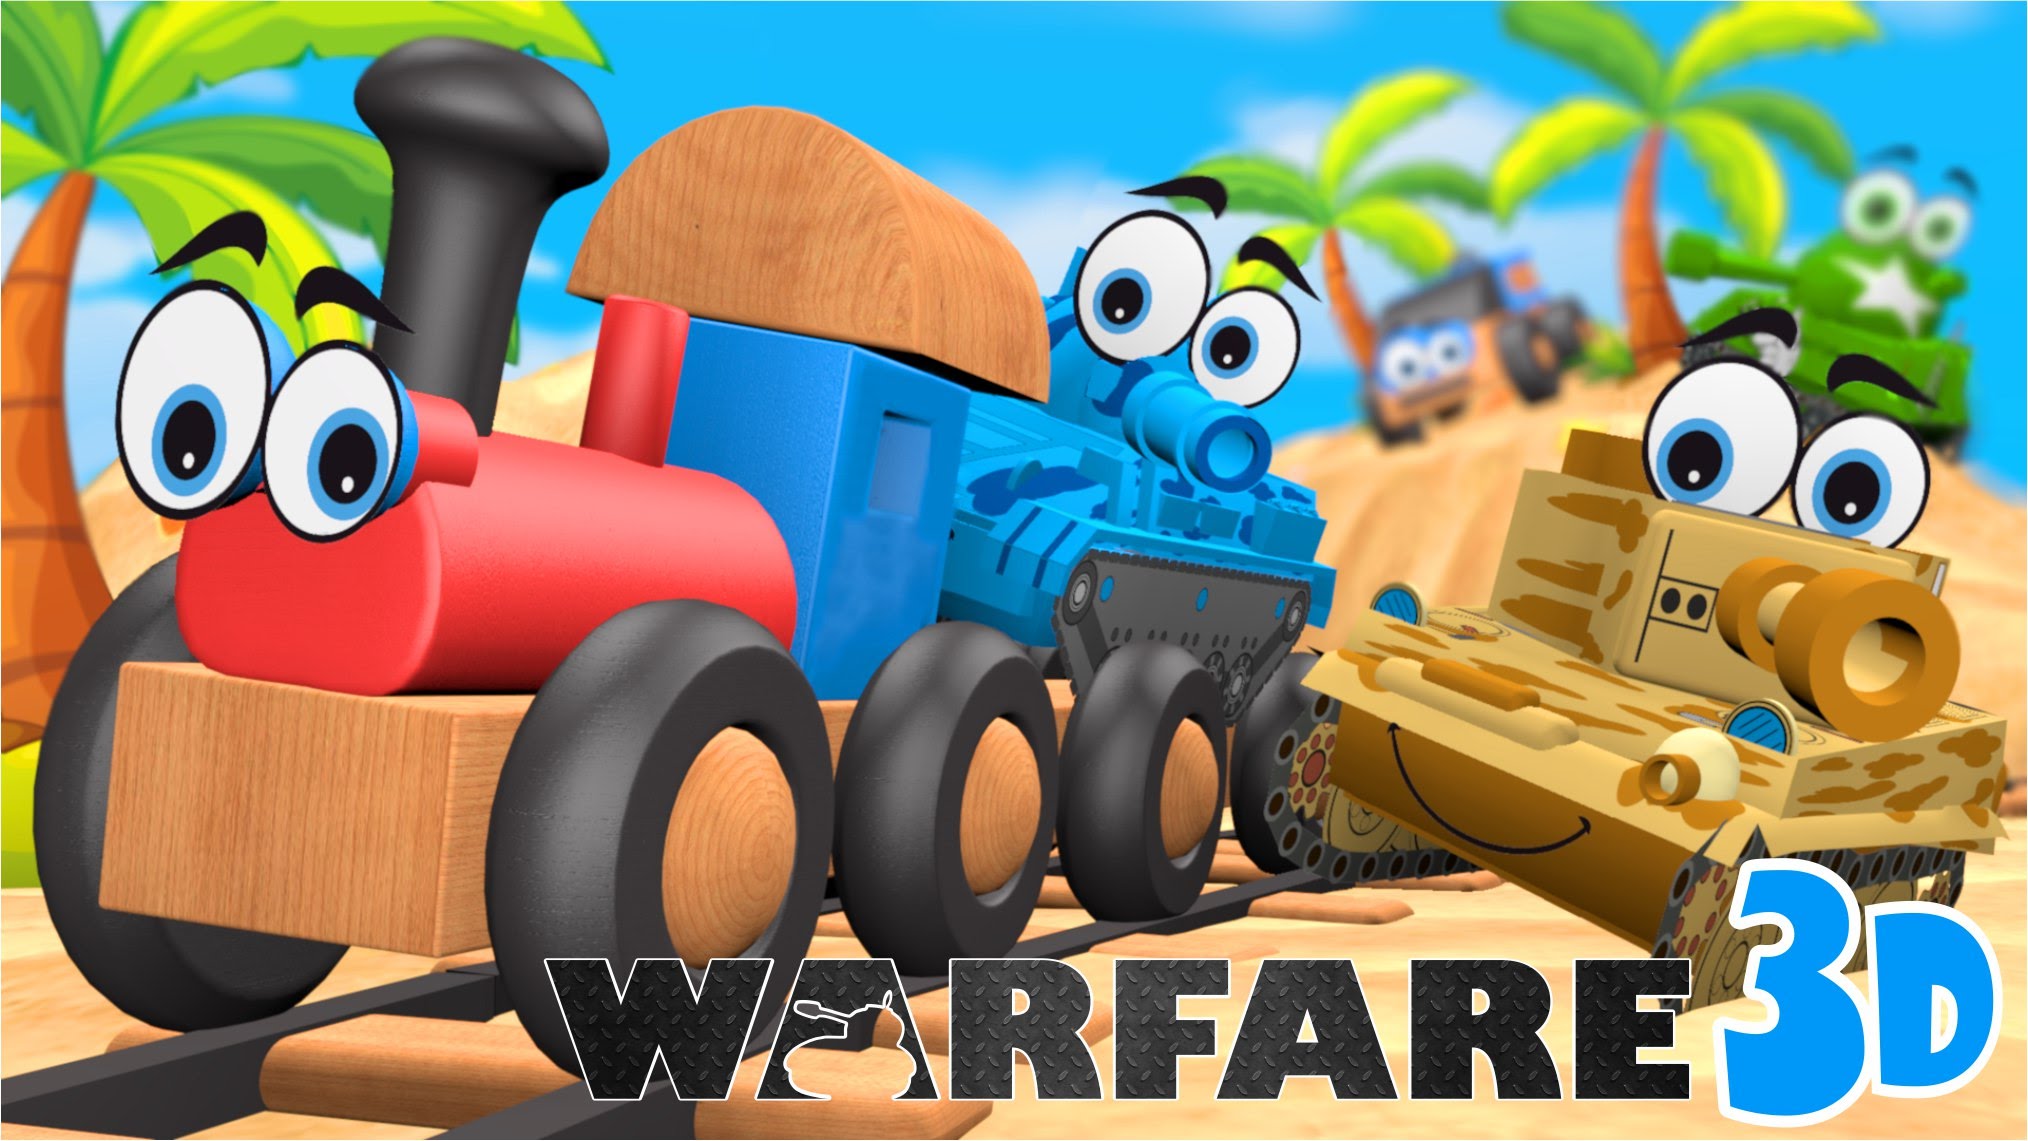 Cartoons Warfare #3D - Tropical Vacation Cartoon about Cars vs Tanks & Train  VIDEO FOR CHILDREN - Closed Captions by CCTubes